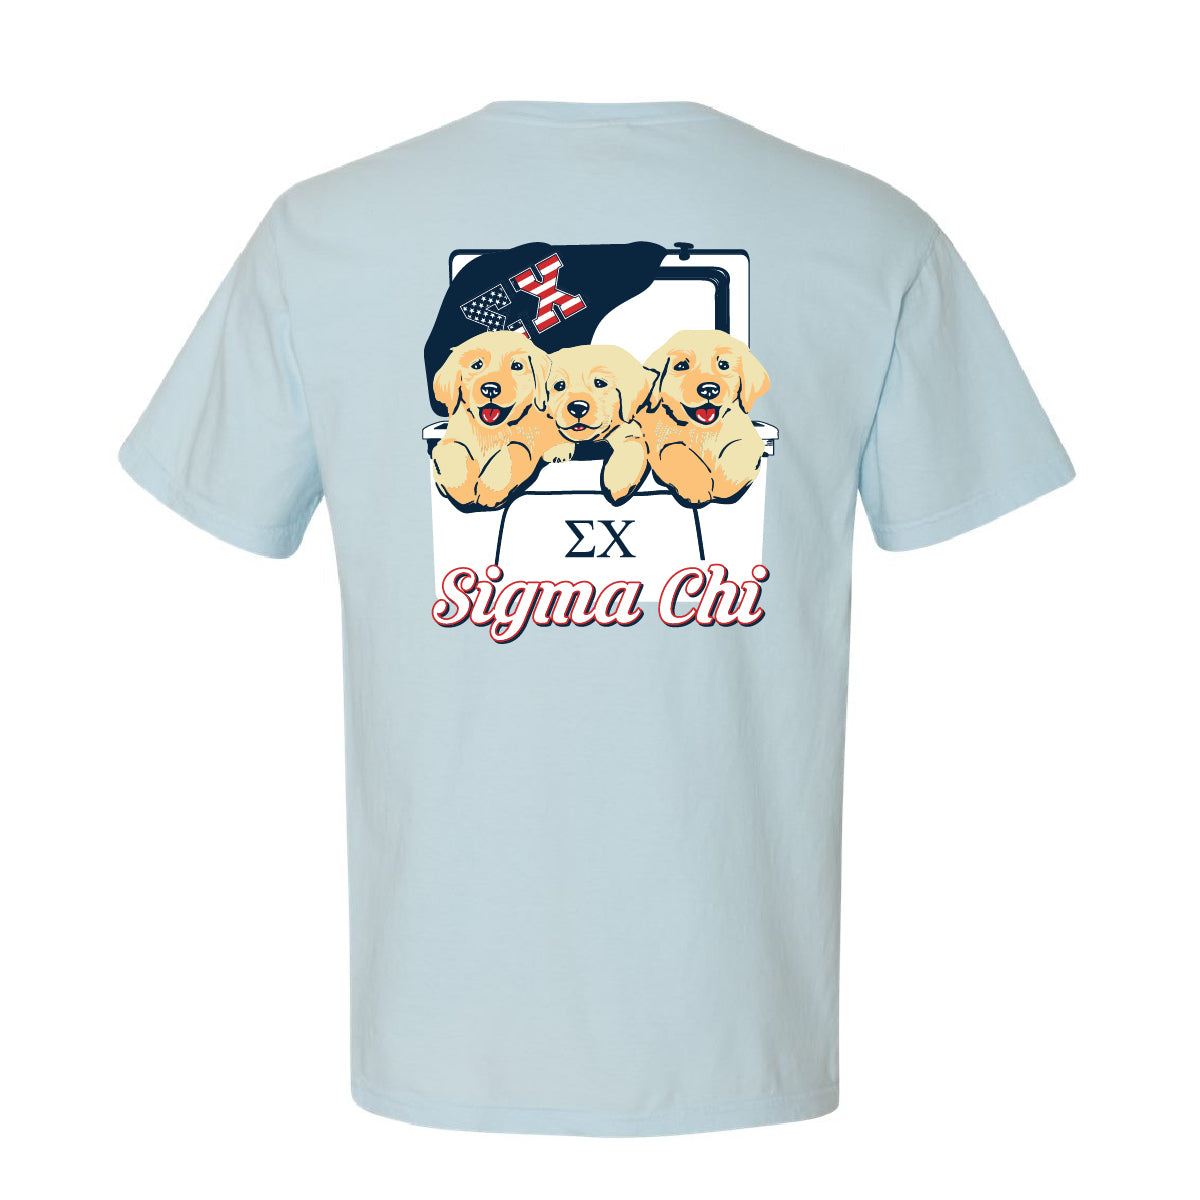 Sigma Chi Puppy in a Cooler Tee (MH-EX-61340)